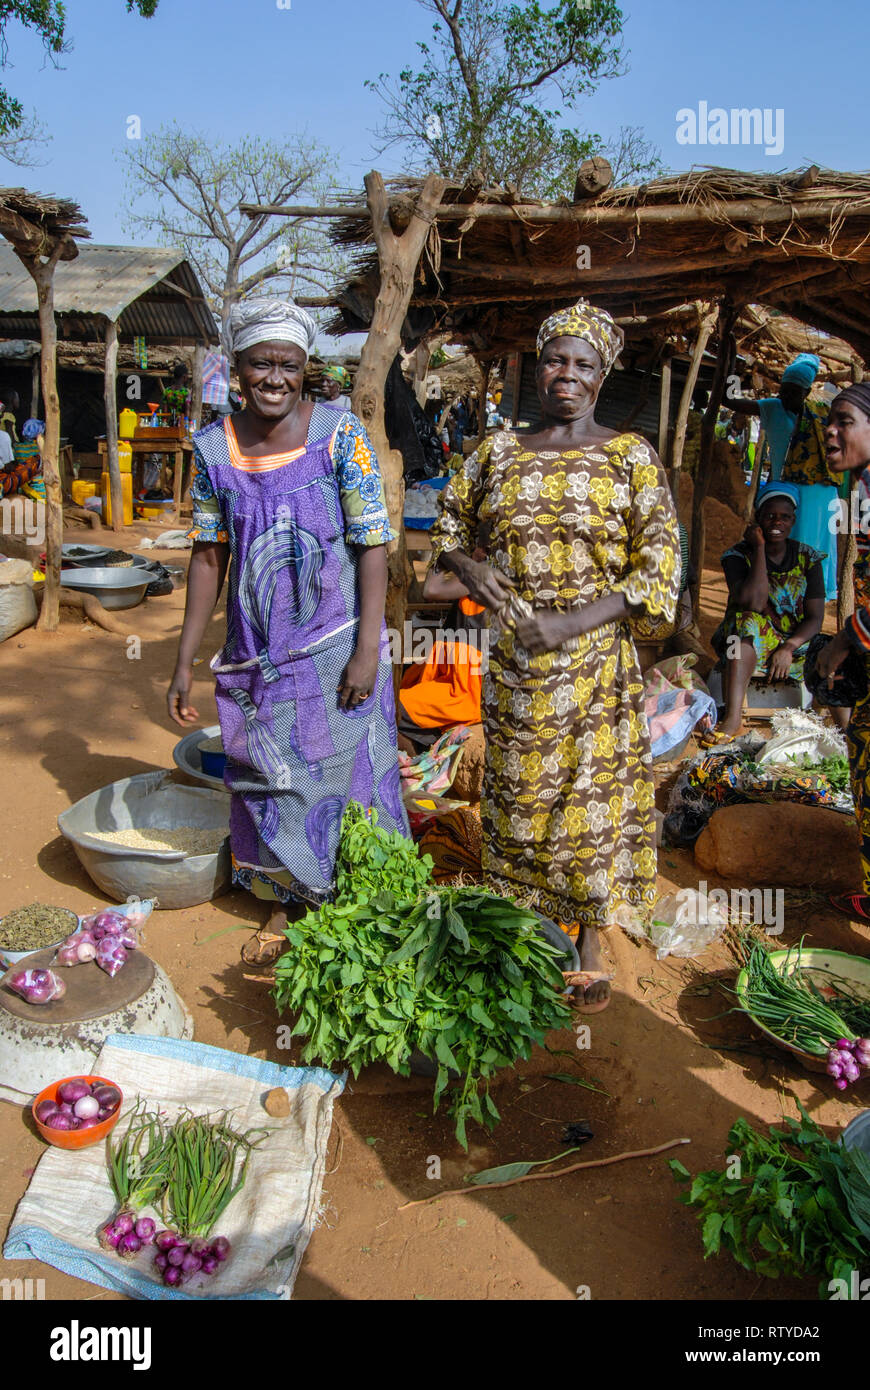 A nice photo of two beautiful Ghanaian women wearing traditional clothes selling vegetables and spices at the local fresh market in Kongo village. Stock Photo